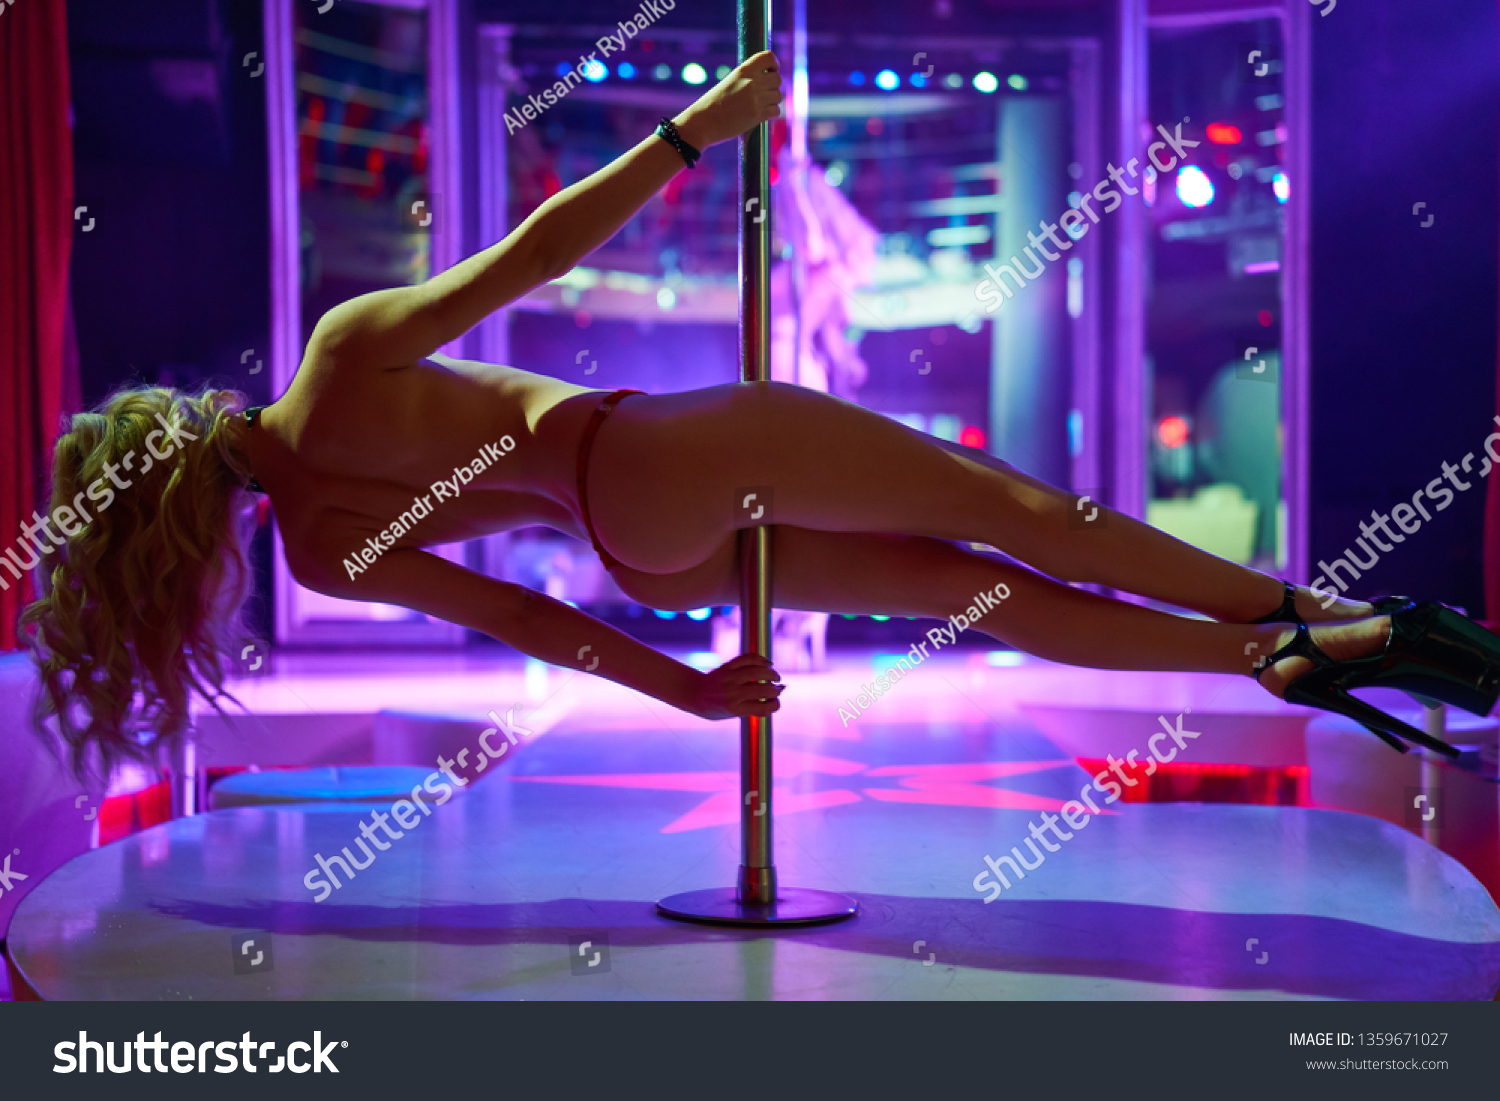 Naked Sexy Women Strippers